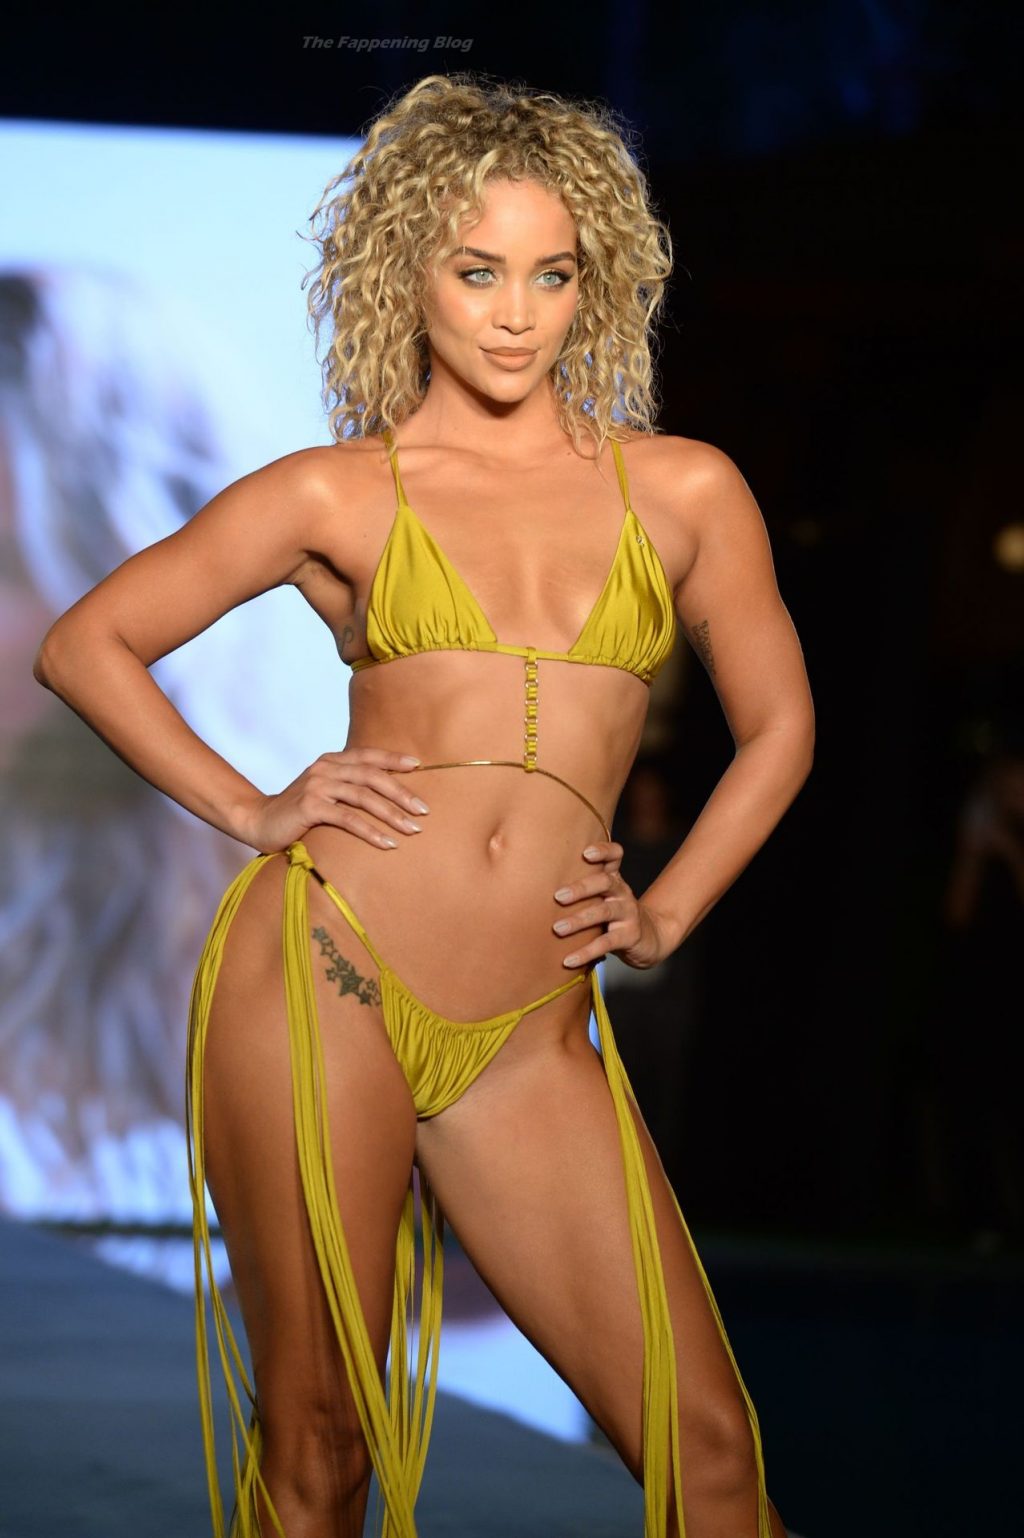 Tittyless Jasmine Sanders Wows at the 2021 Sports Illustrated Swimsuit Runway Show (105 Photos)